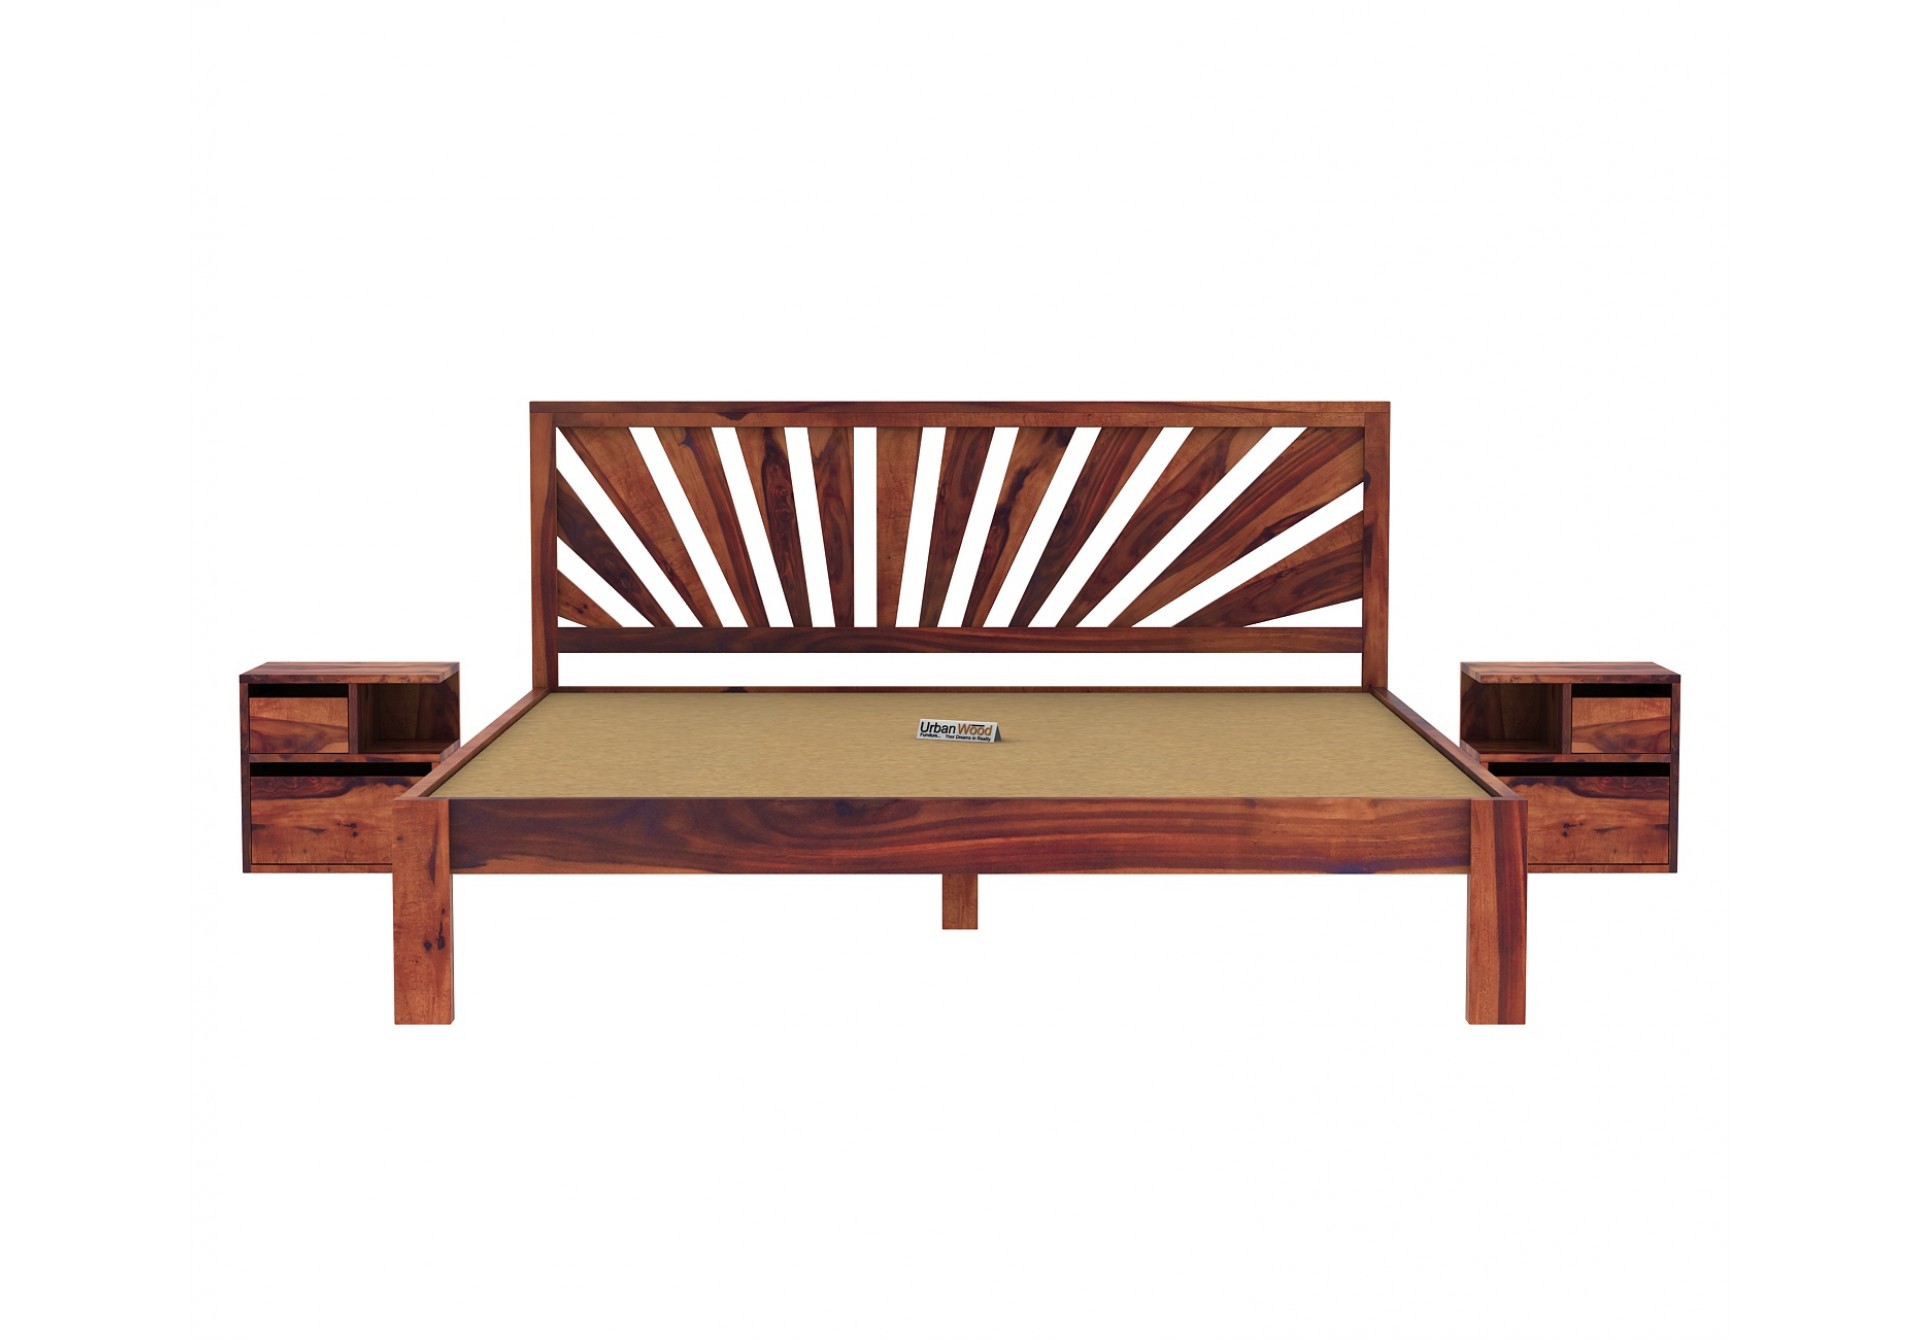 Jerry Wooden Bed Without storage King Size (Teak Finish)